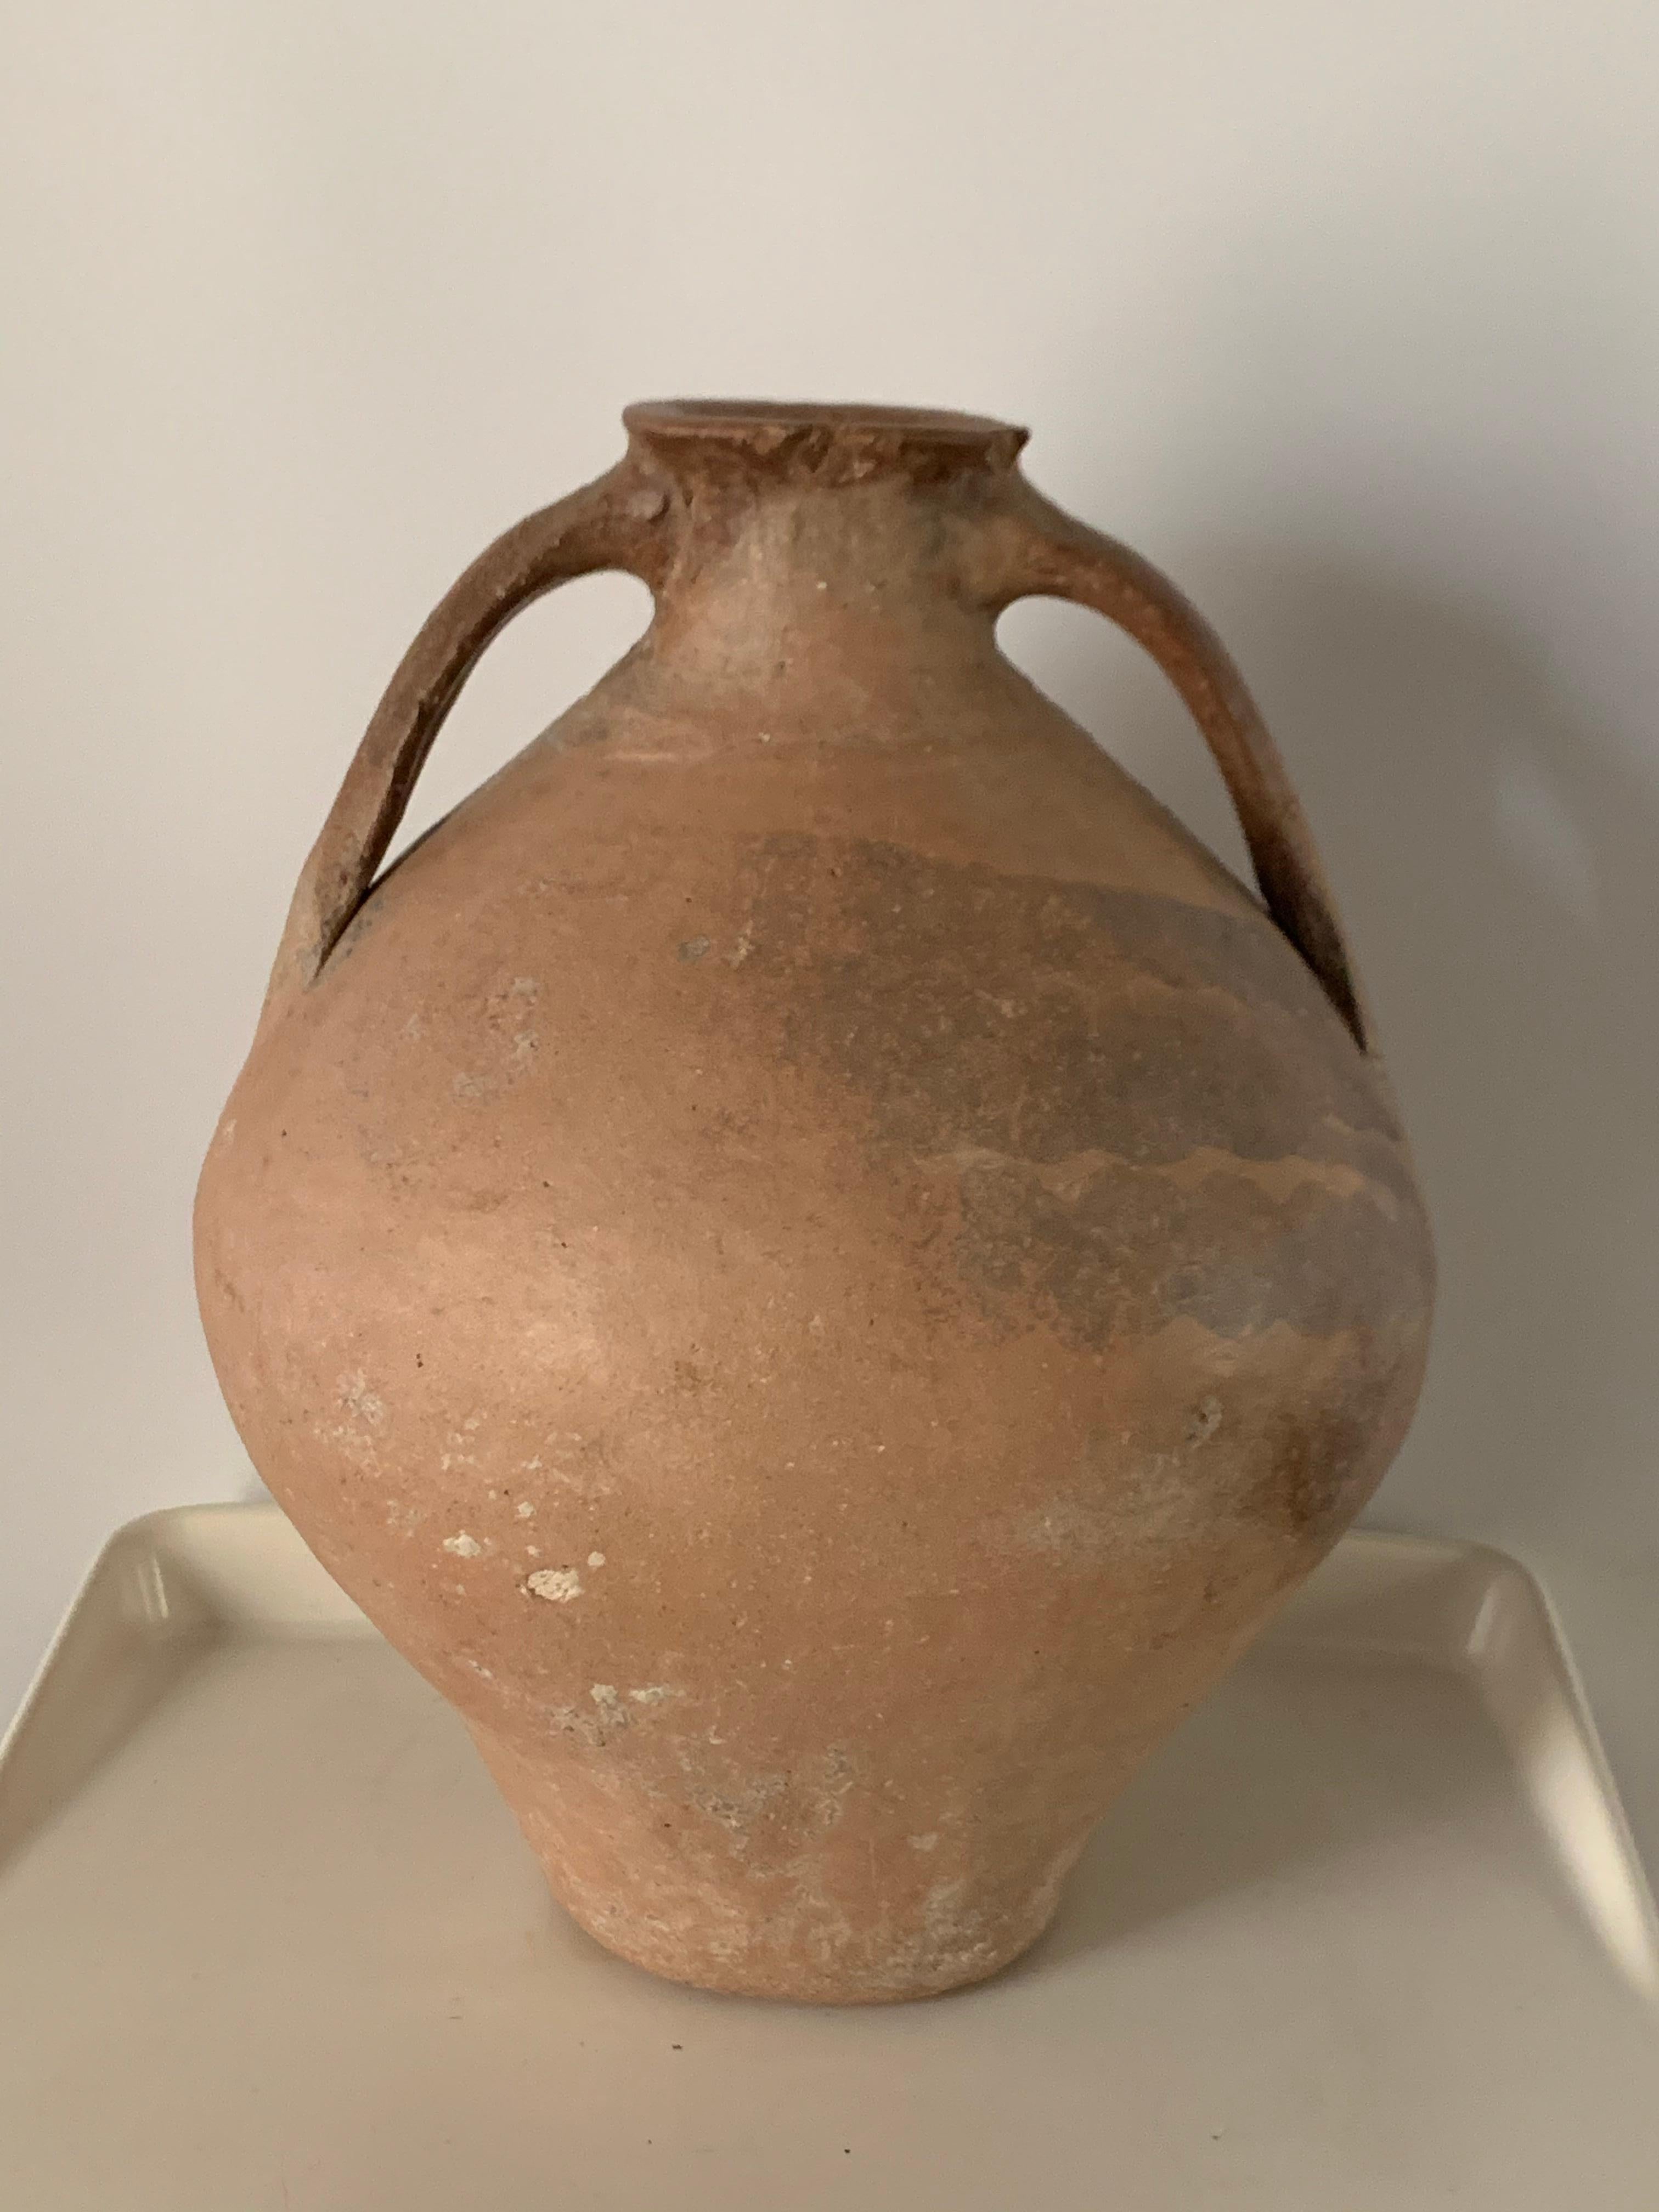 Pitcher ‘cantaros’ from Calanda, Aragon-Zaragoza area of Spain. A rare piece from a Private collection, circa 1850. Other examples can be seen in the Museo de Zaragoza.
With gorgeous original patina, this jar features the characteristic